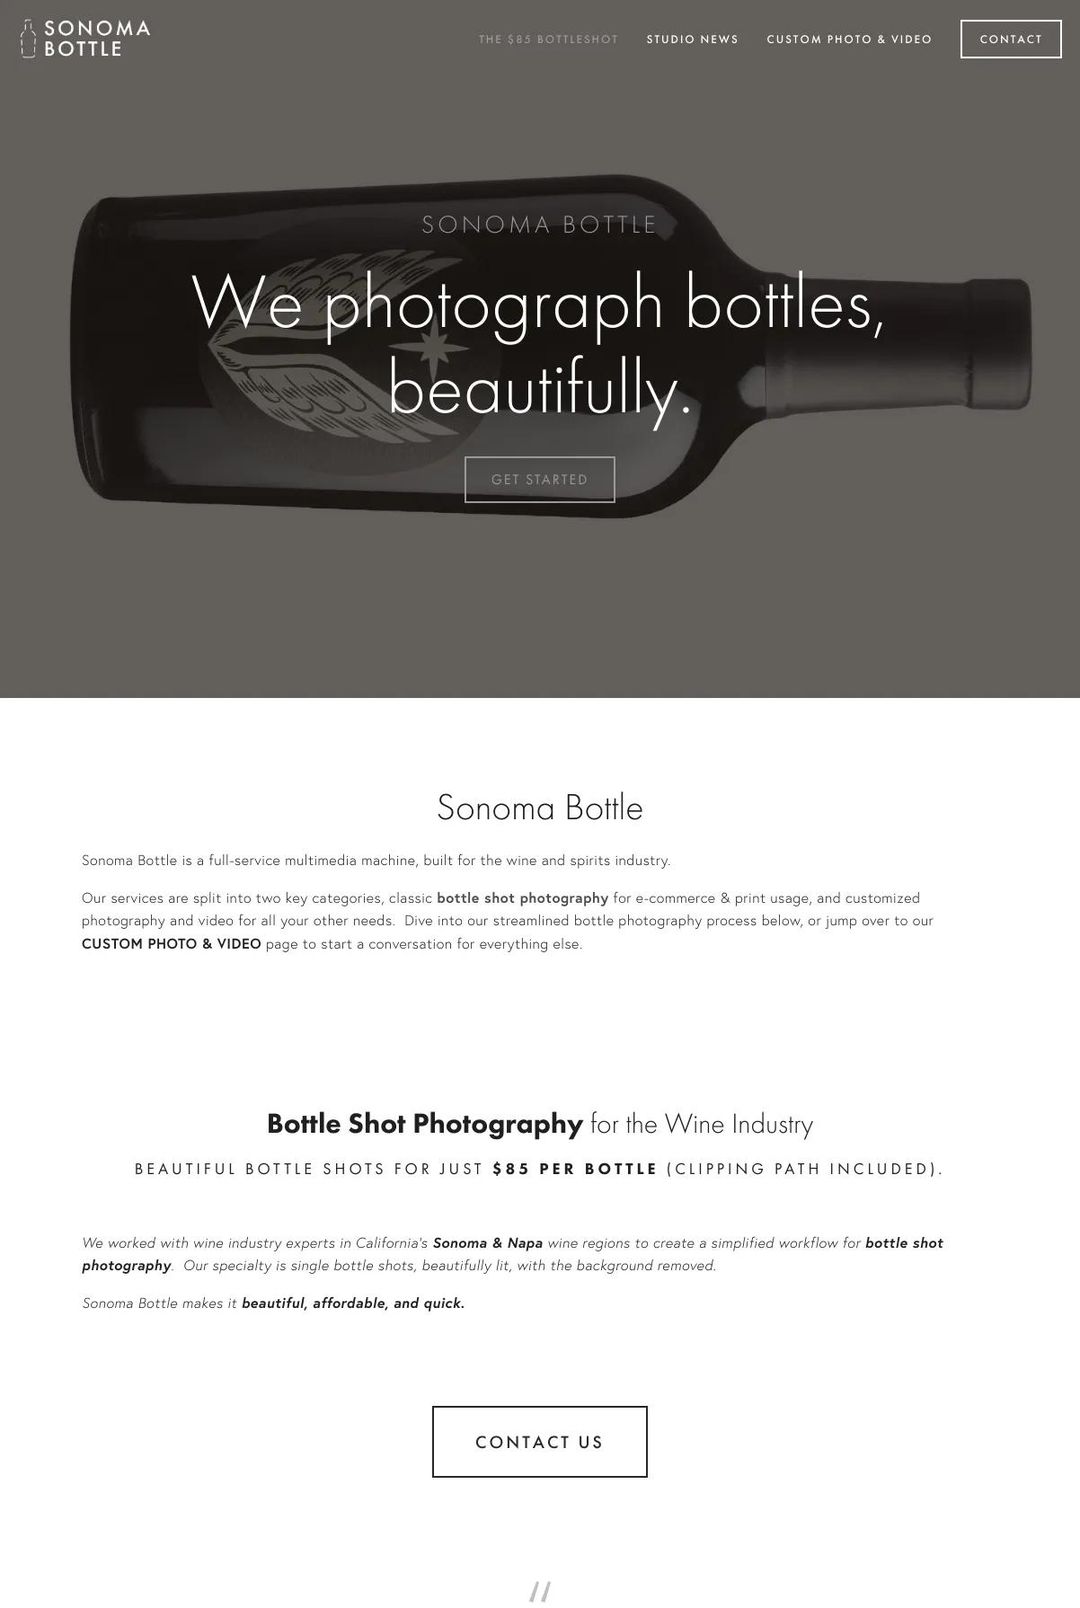 Screenshot 1 of Sonoma Bottle (Example Squarespace Photography Website)